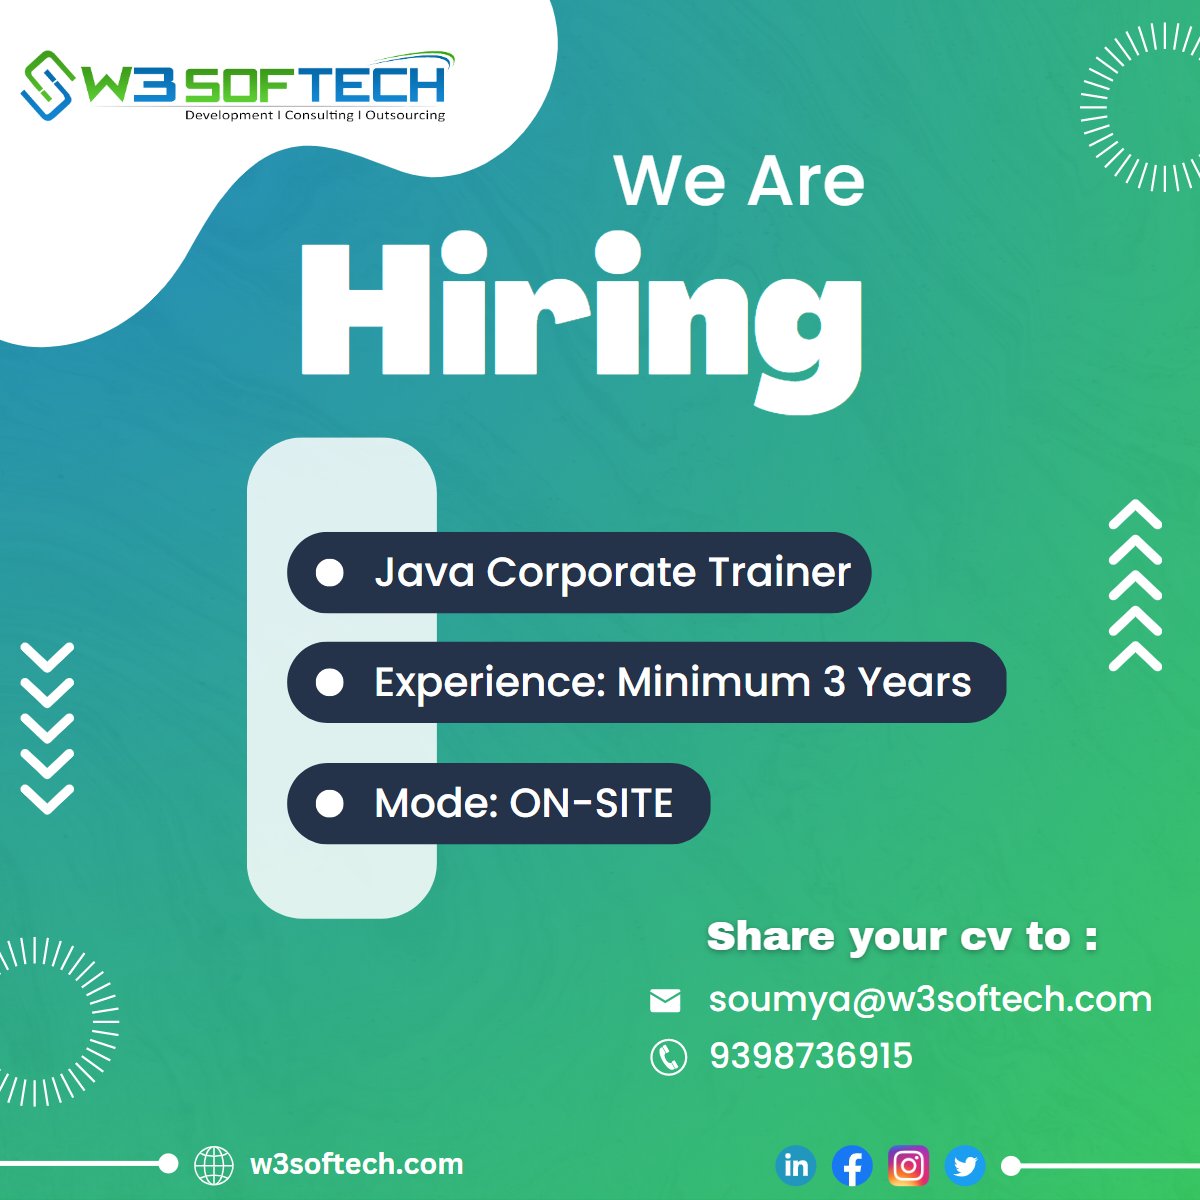 We are looking for a Java Corporate Trainer having minimum 3 years of training experience who is an immediate joiner for an IT company. Share your CV to: Email: soumya@w3softech.com Phone: 9398736915 #java #training #corporatetraining #offline